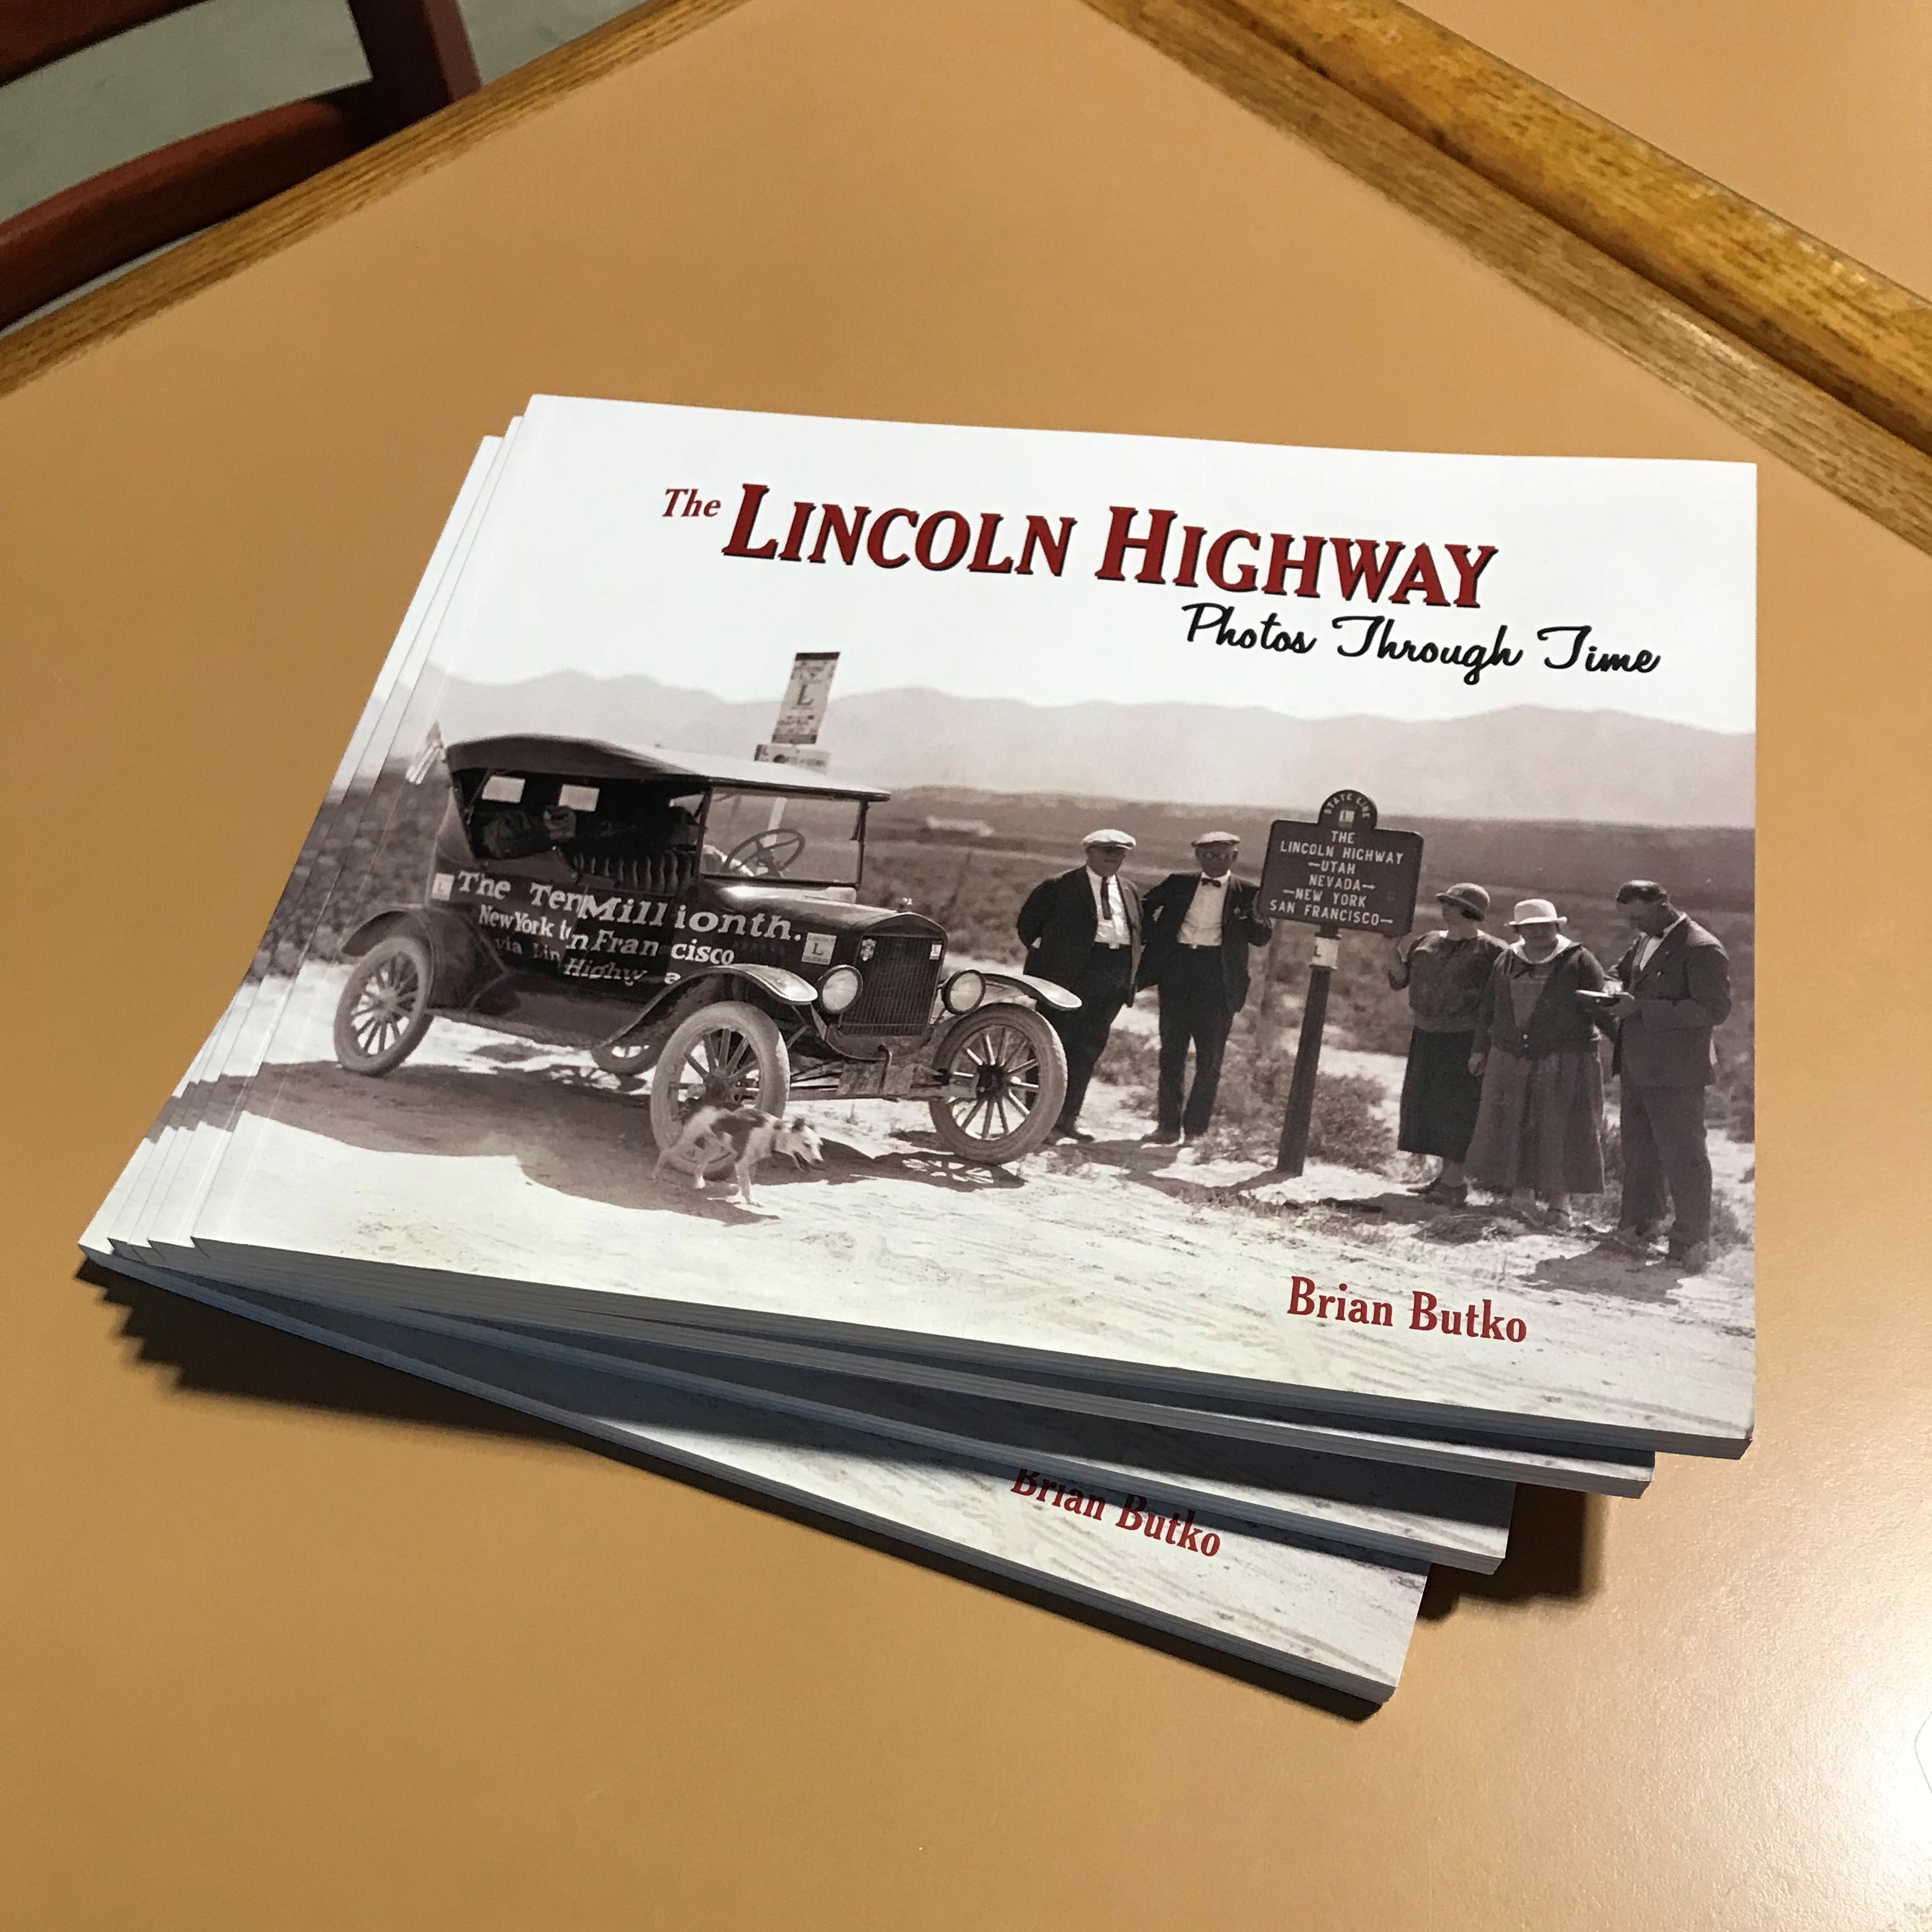 The Lincoln Highway - Photos Through Time by Brian Butko